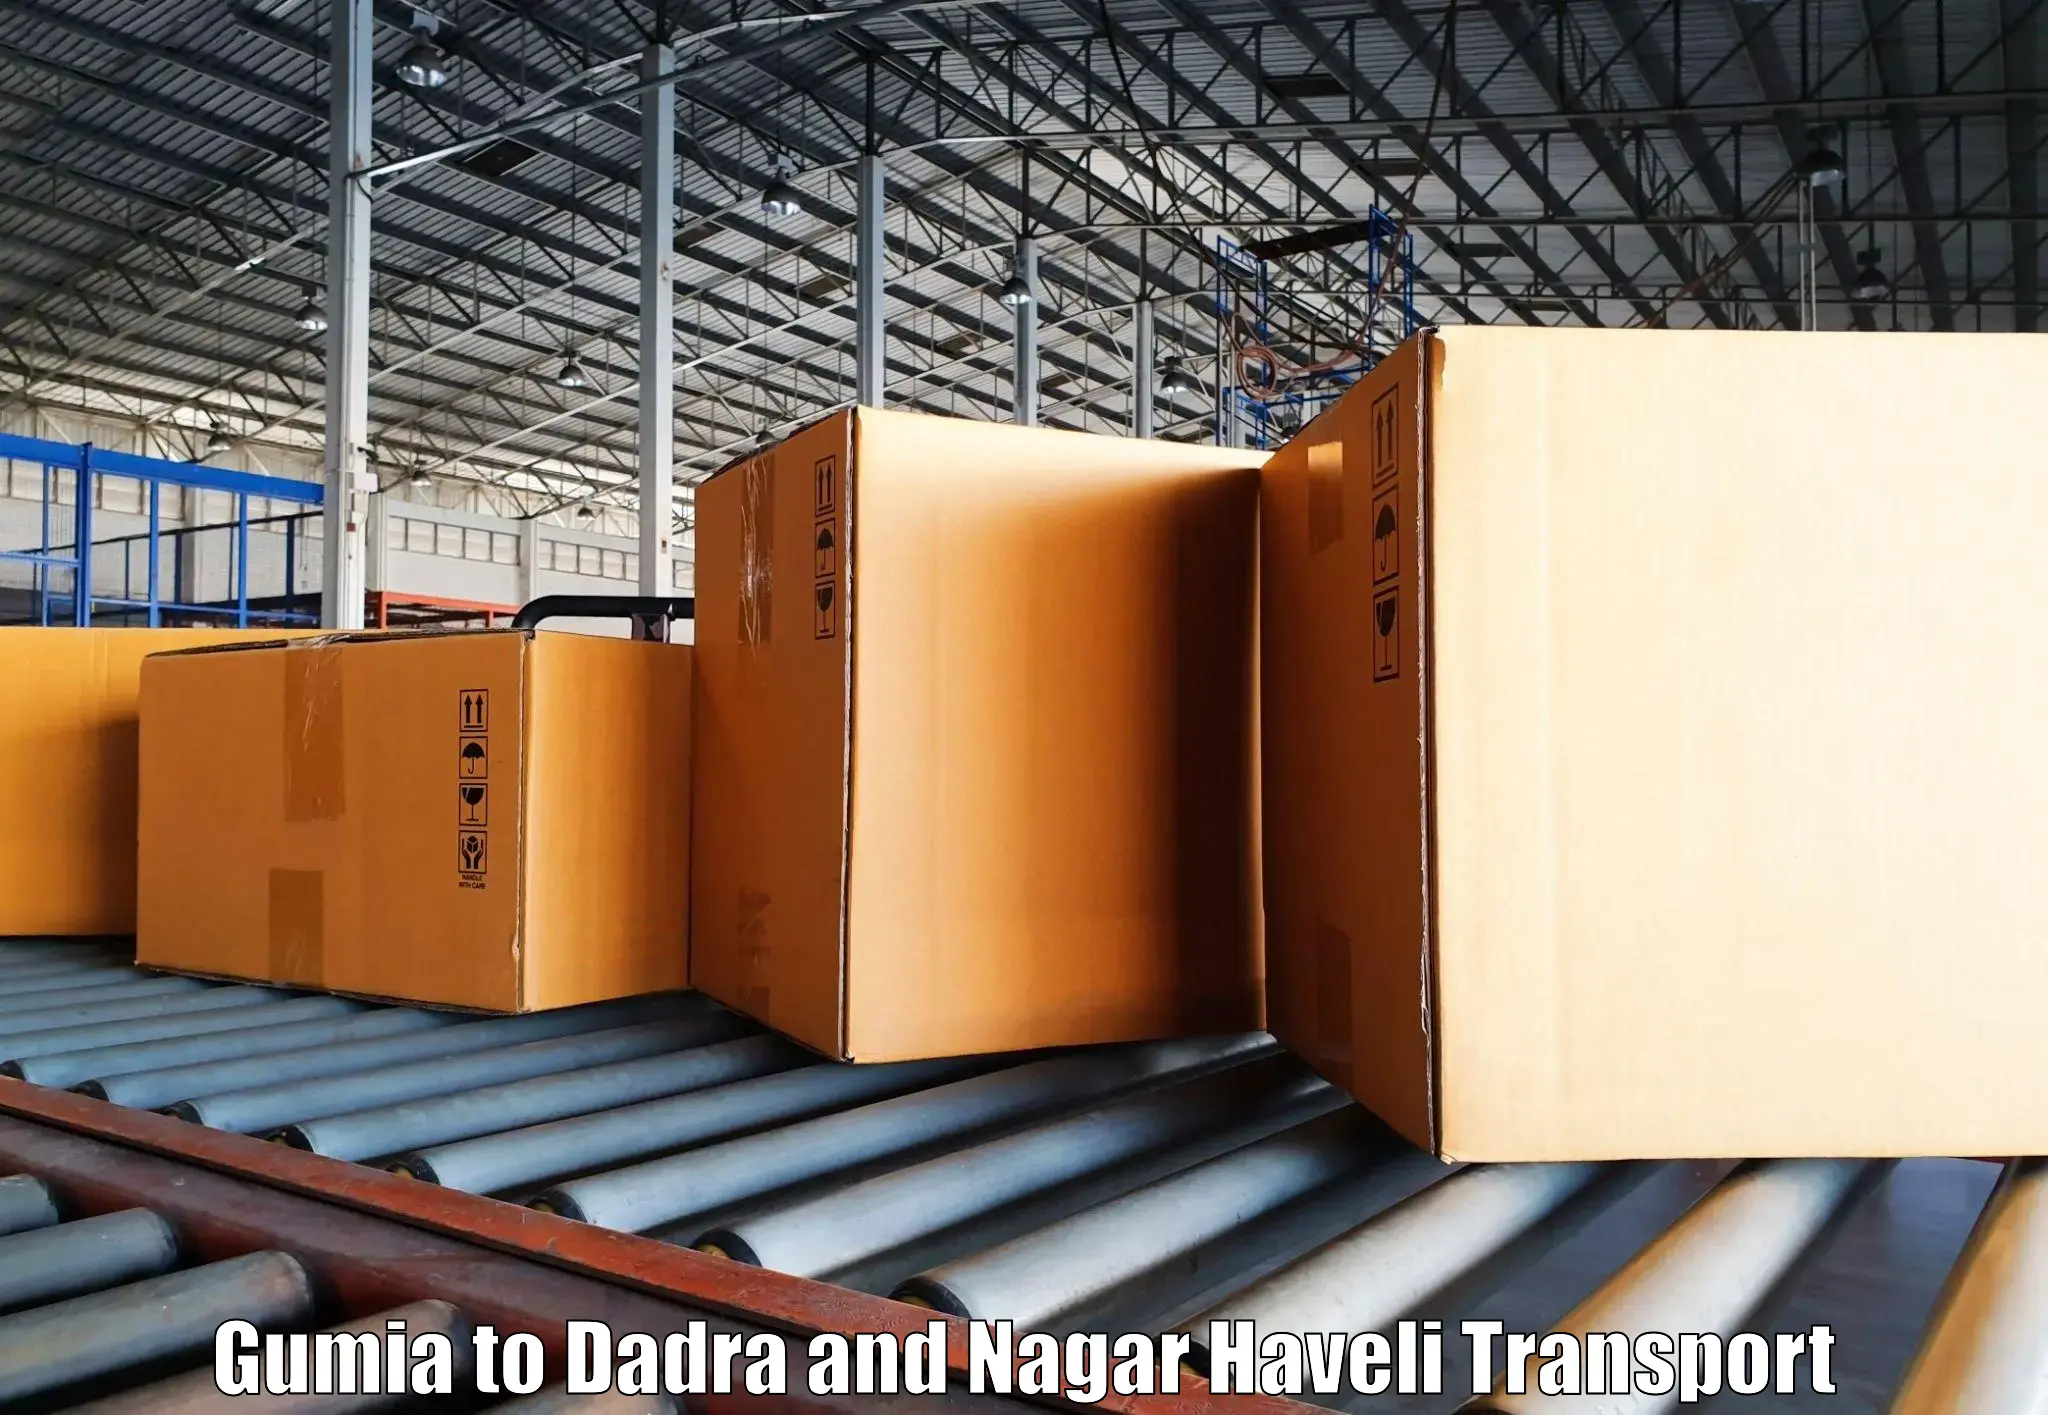 Container transport service in Gumia to Dadra and Nagar Haveli